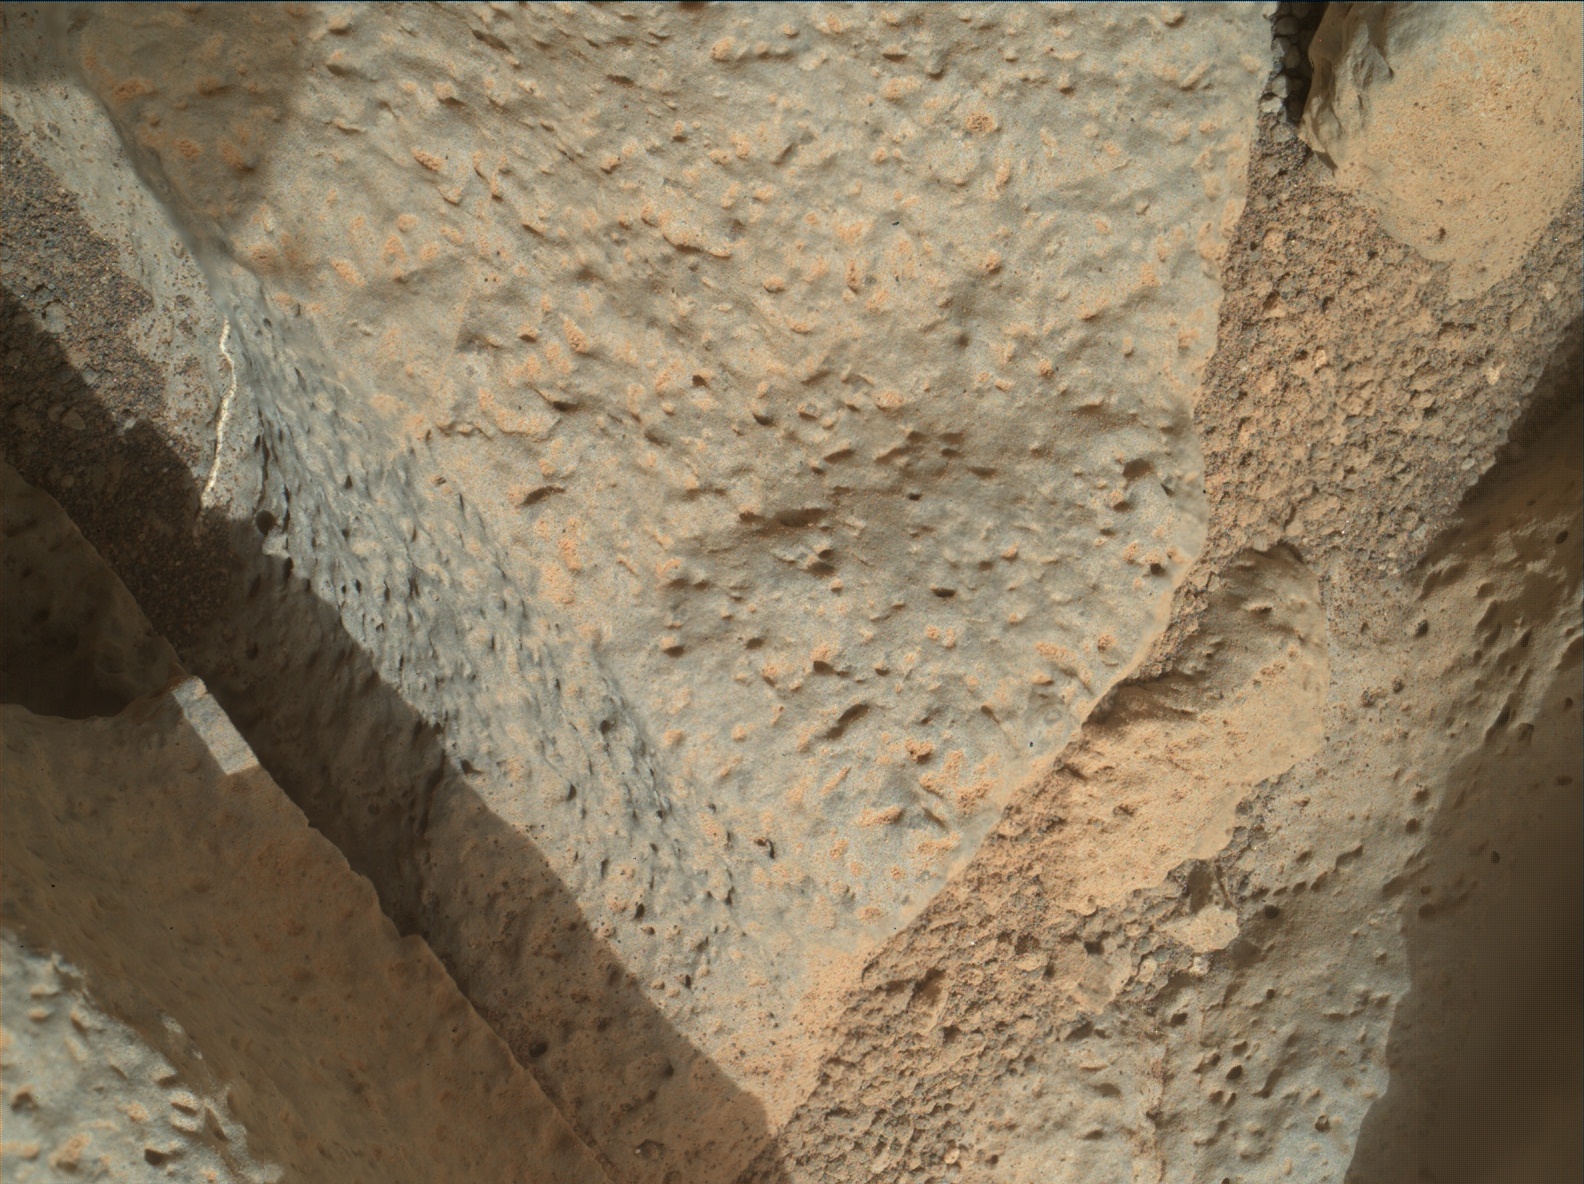 Nasa's Mars rover Curiosity acquired this image using its Mars Hand Lens Imager (MAHLI) on Sol 814